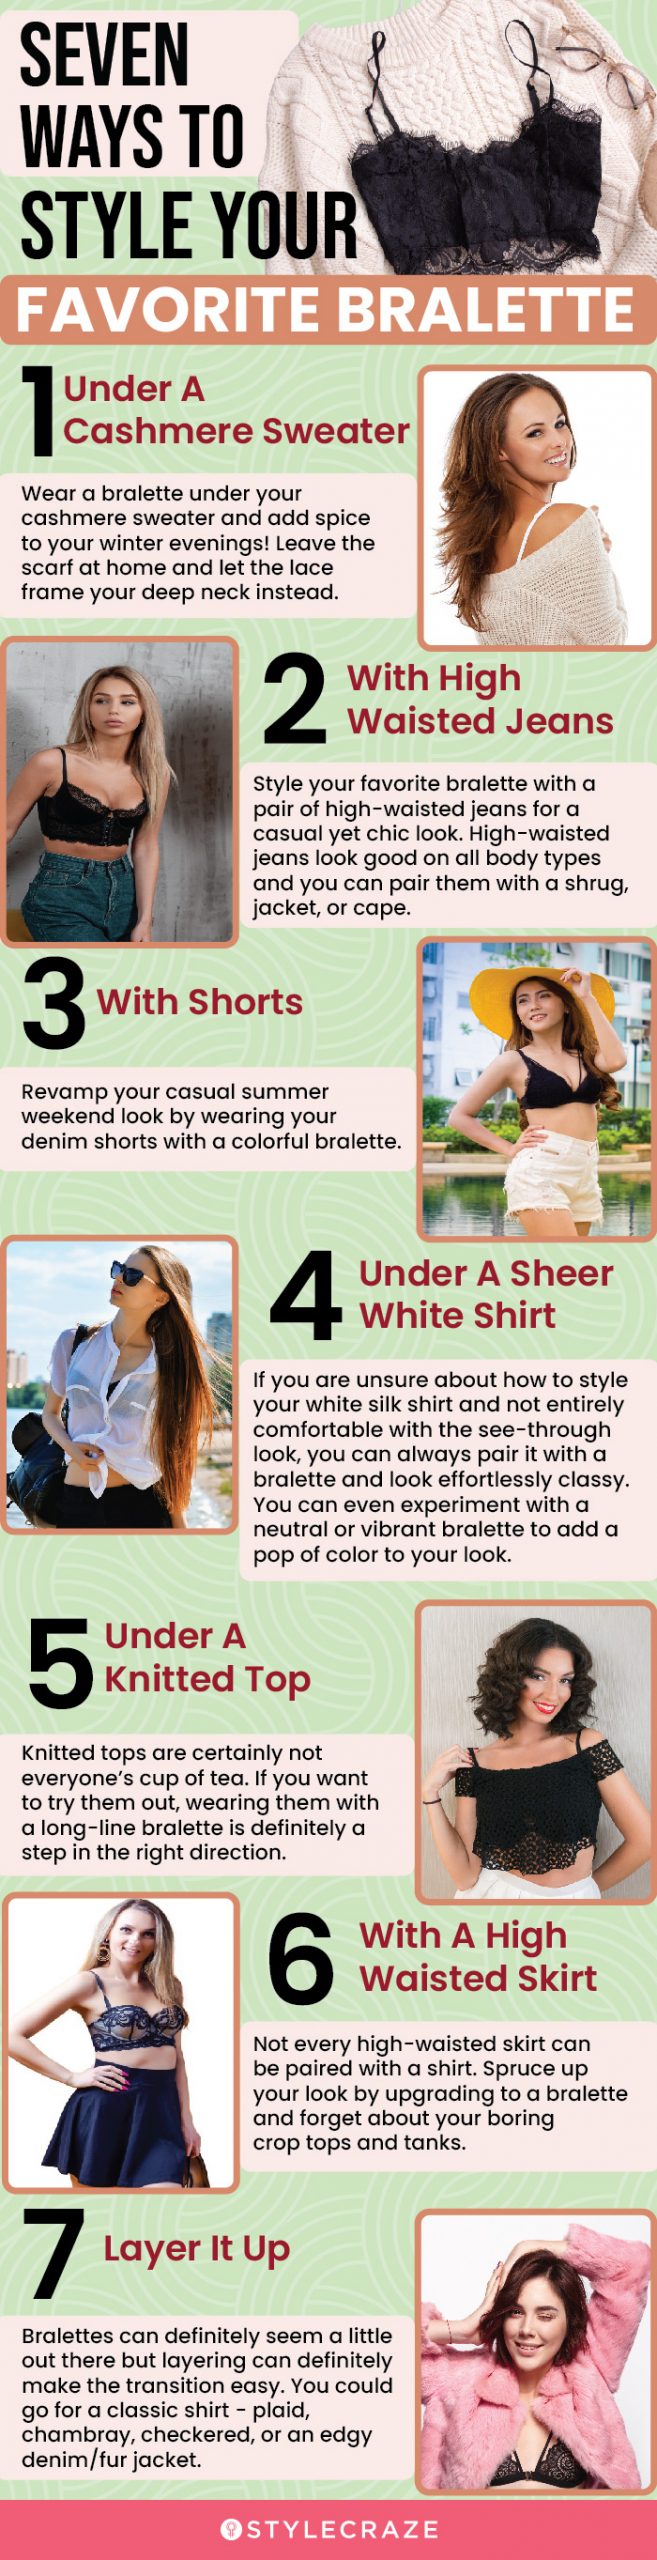 seven ways to style your favorite bralette (infographic)